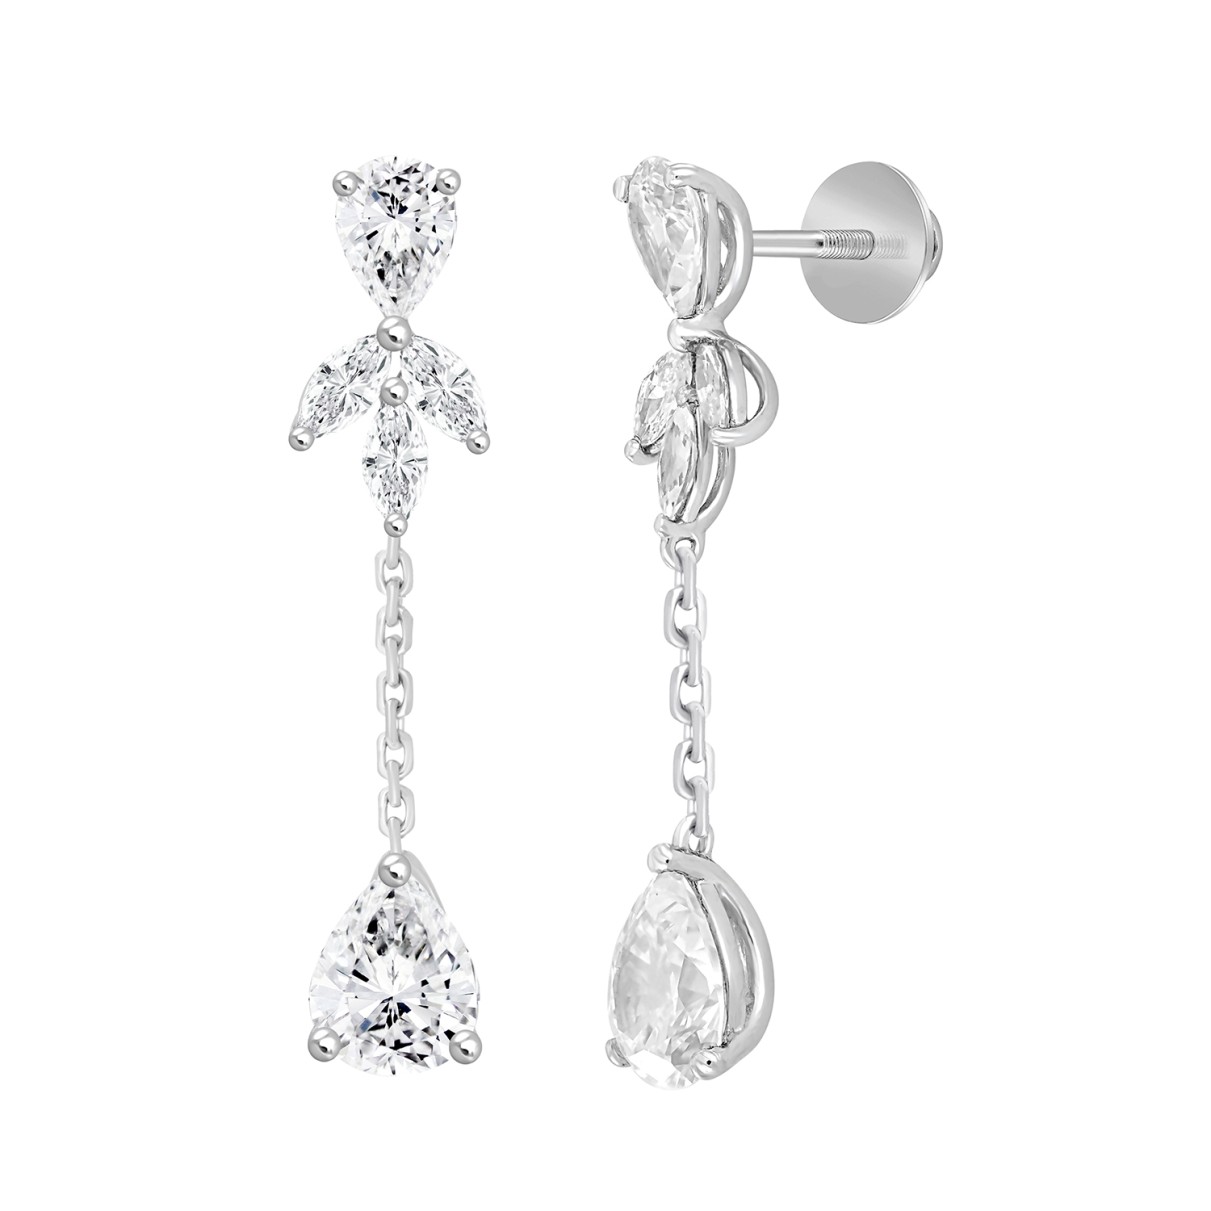 LADIES LINEAR EARRINGS  6CT MARQUISE/PEAR DIAMOND 14K WHITE GOLD